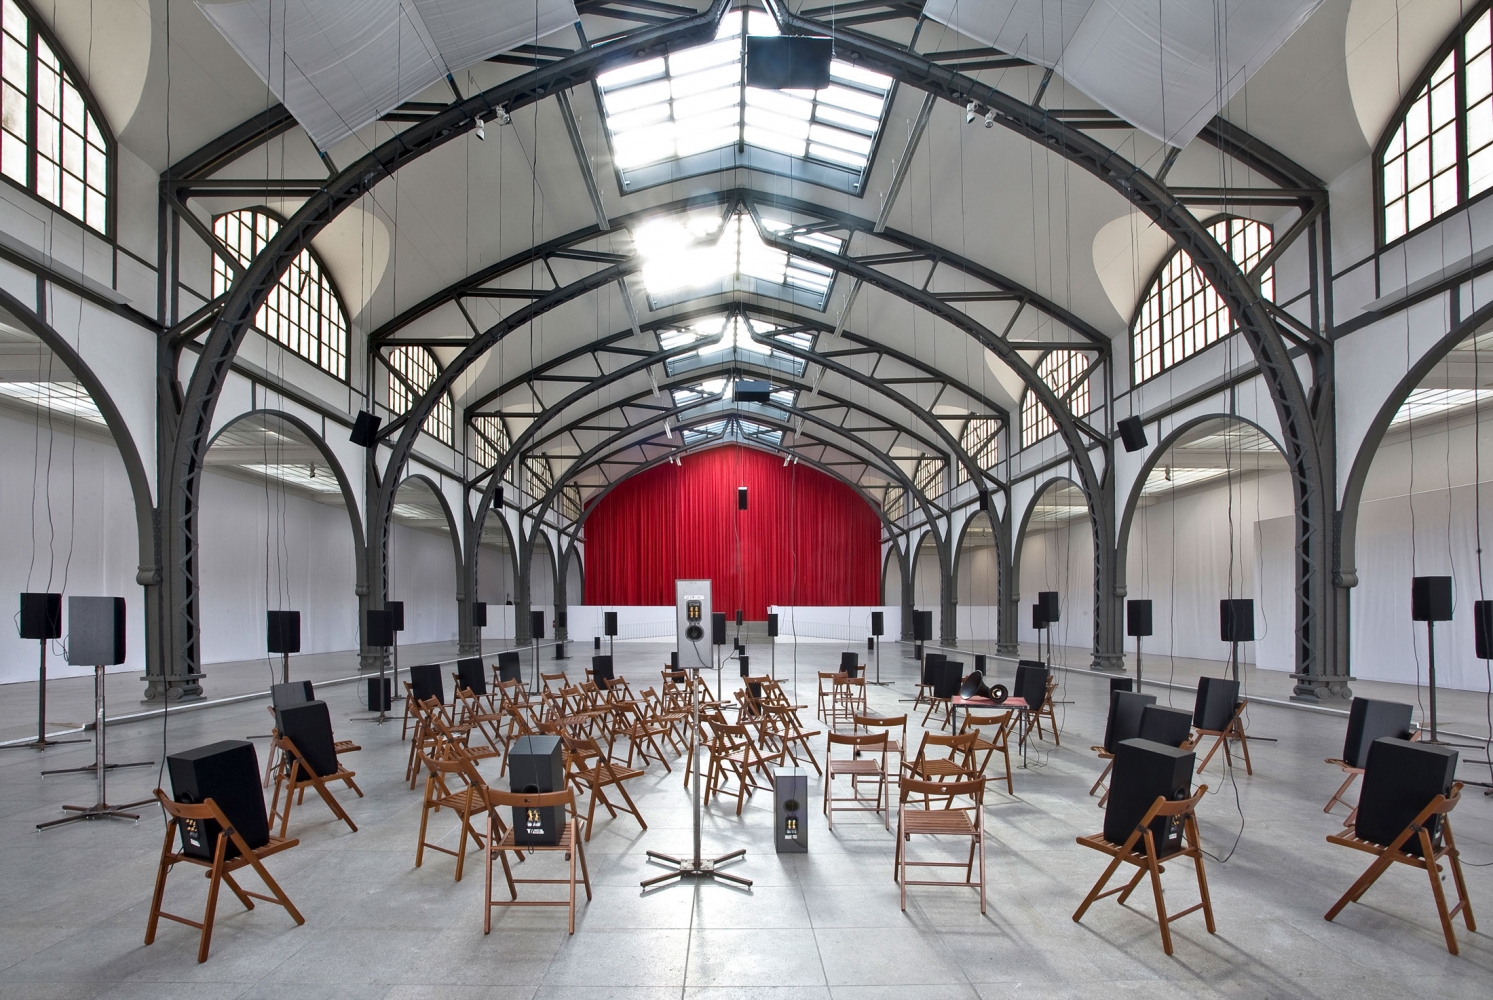 Janet Cardiff and George Bures Miller
The Murder of Crows, 2008
98-channel audio installation including speakers, table, and chairs
Duration: 30 minutes
Dimensions variable
Installation view at the Nationalgalerie im Hamburger Bahnhof, Staatliche Museen zu Berlin, 2009